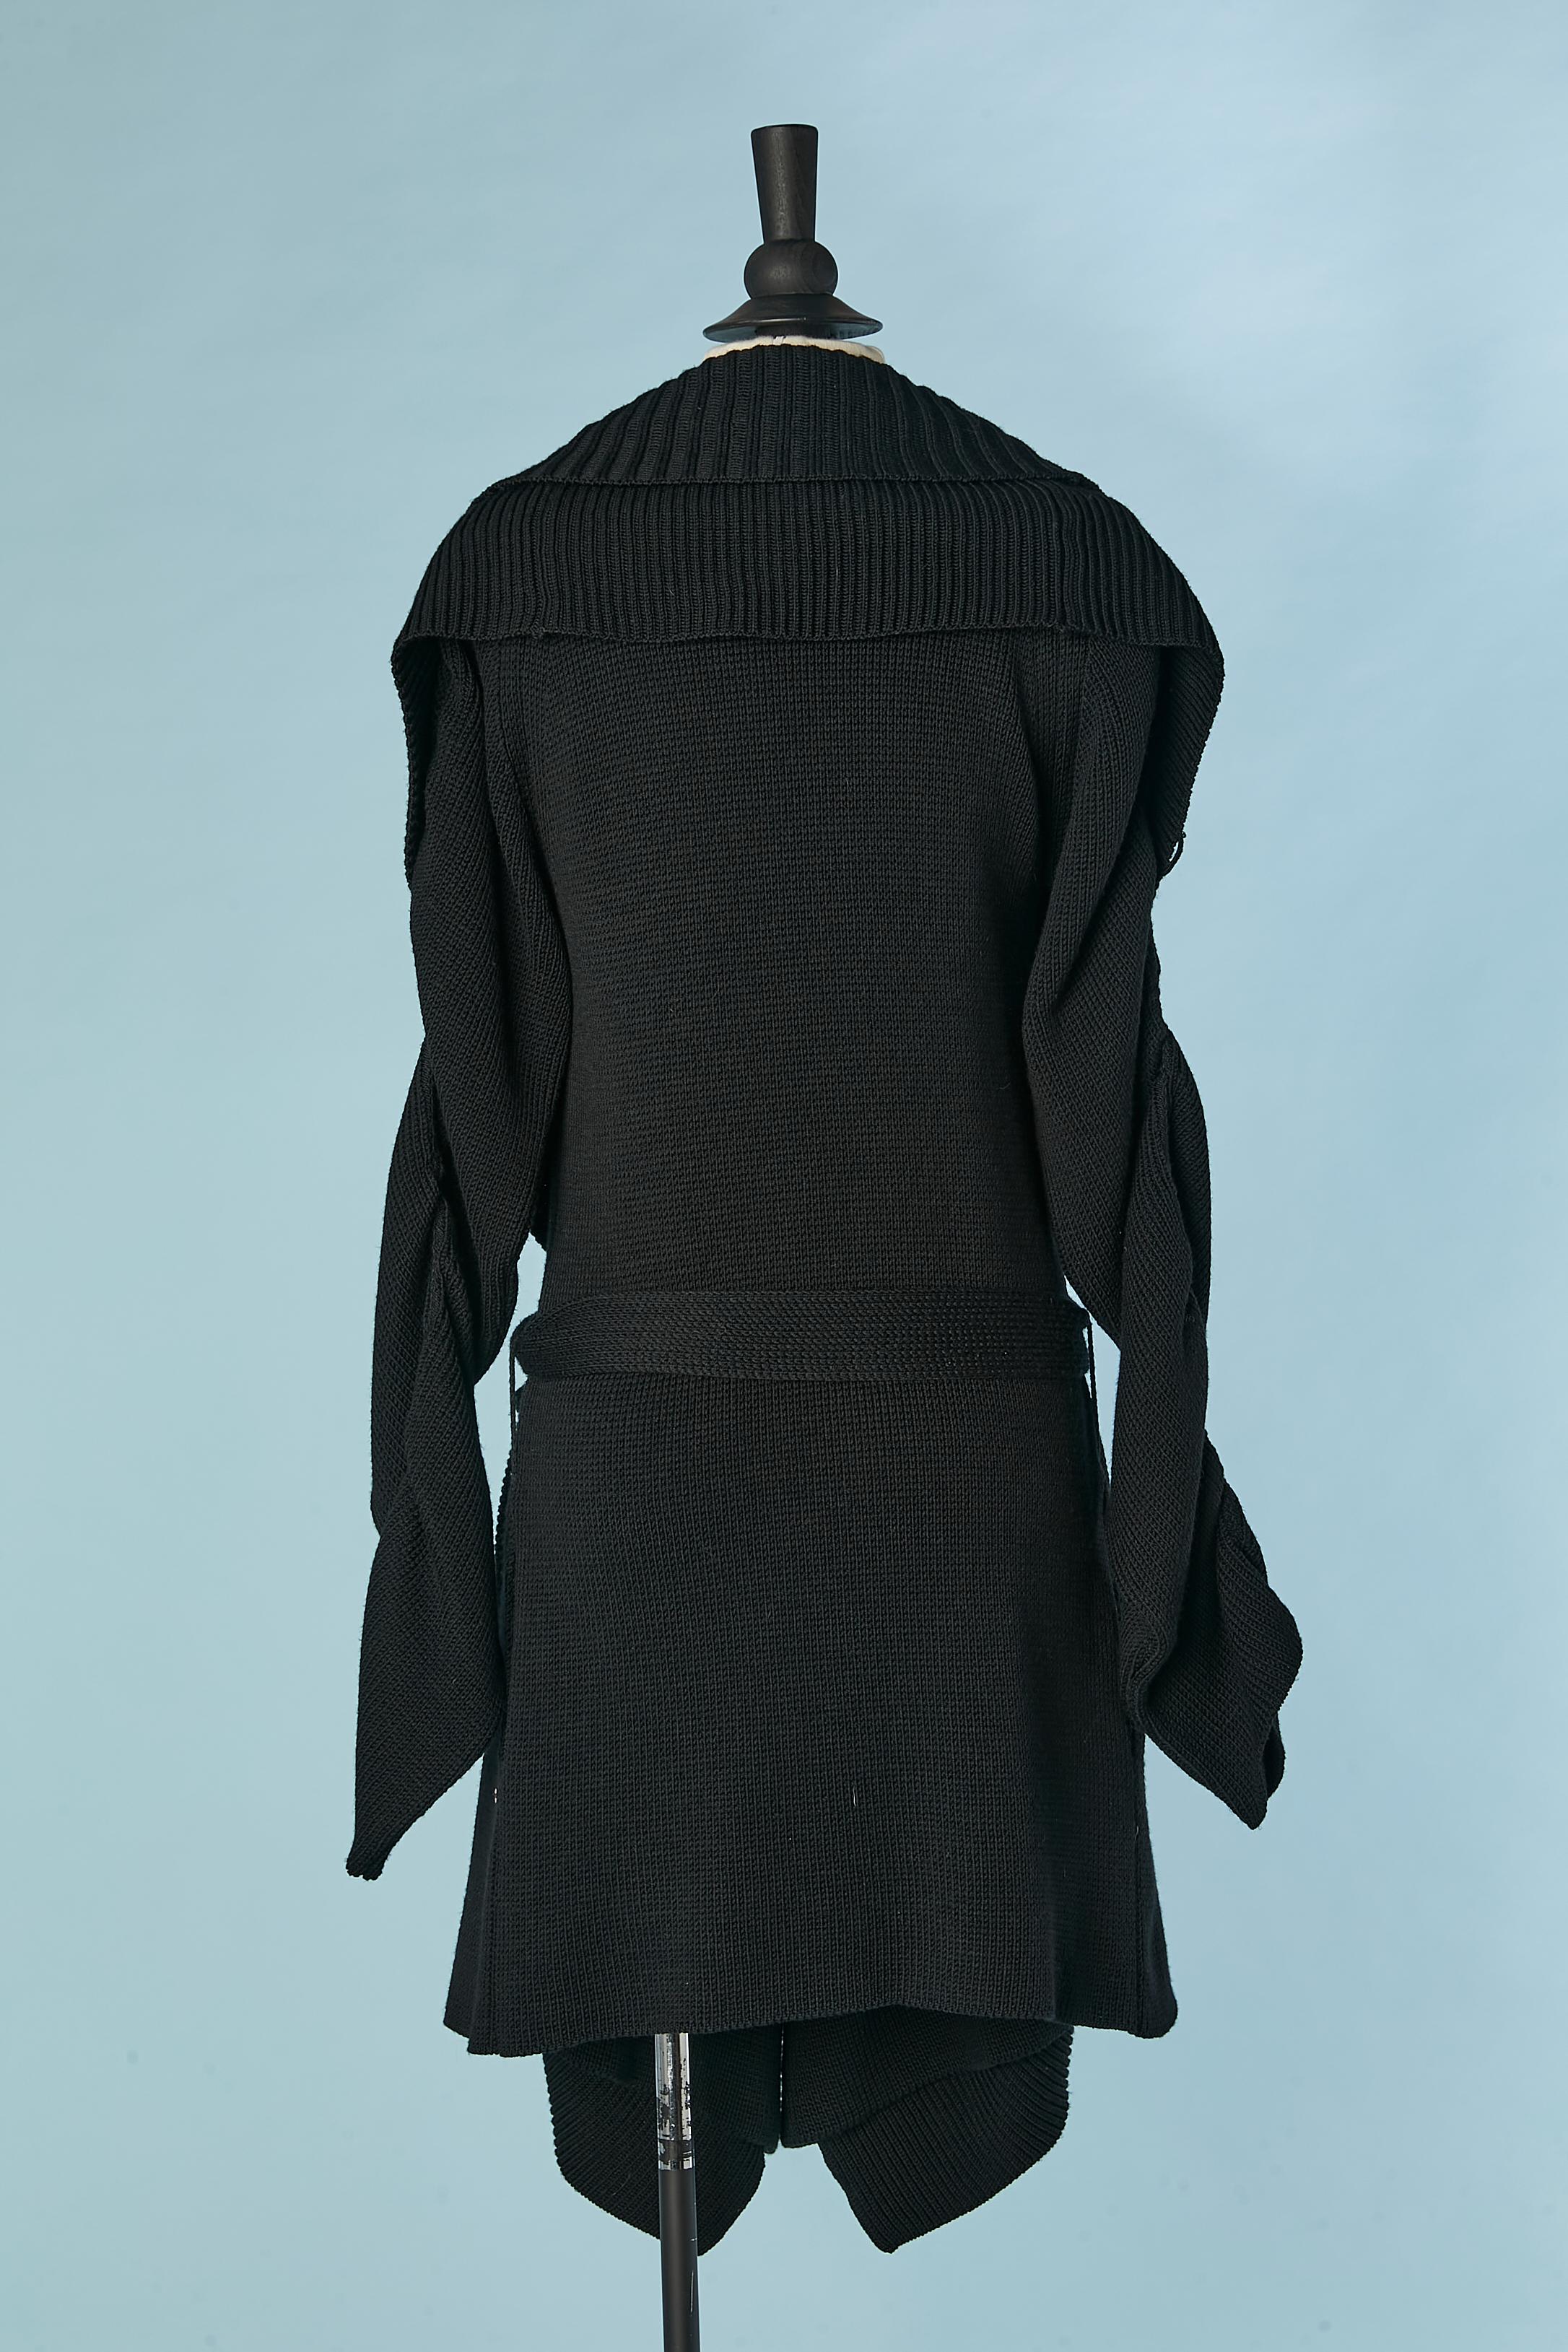 Black wool knit coat with belt and double collar Sonia Rykiel  For Sale 4